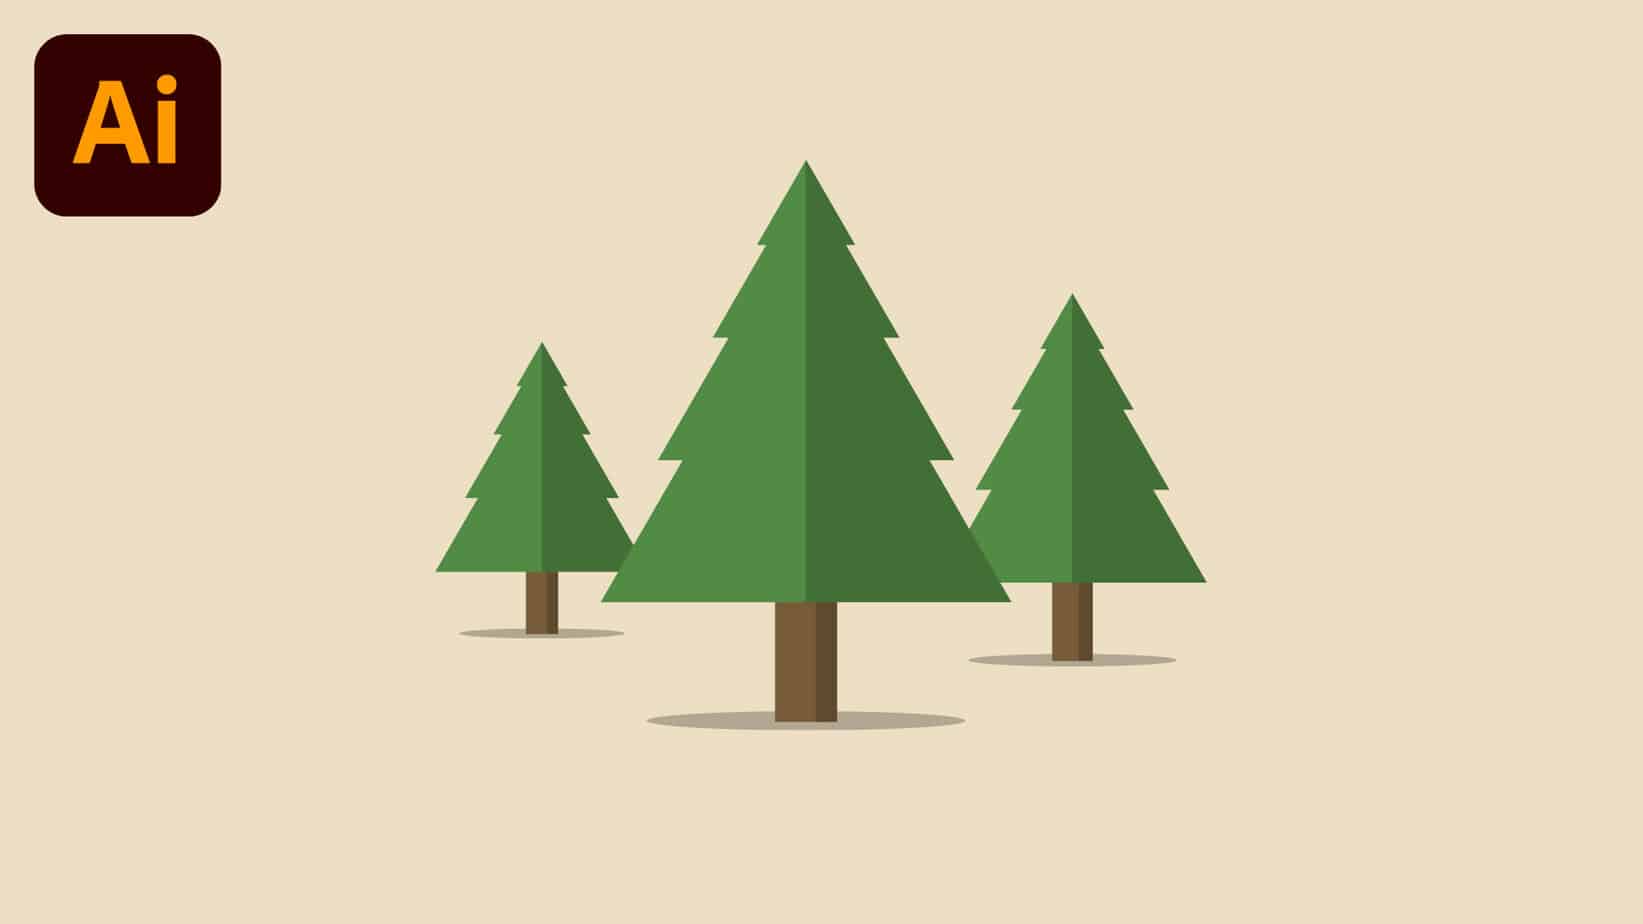 How to Make a Tree in Illustrator